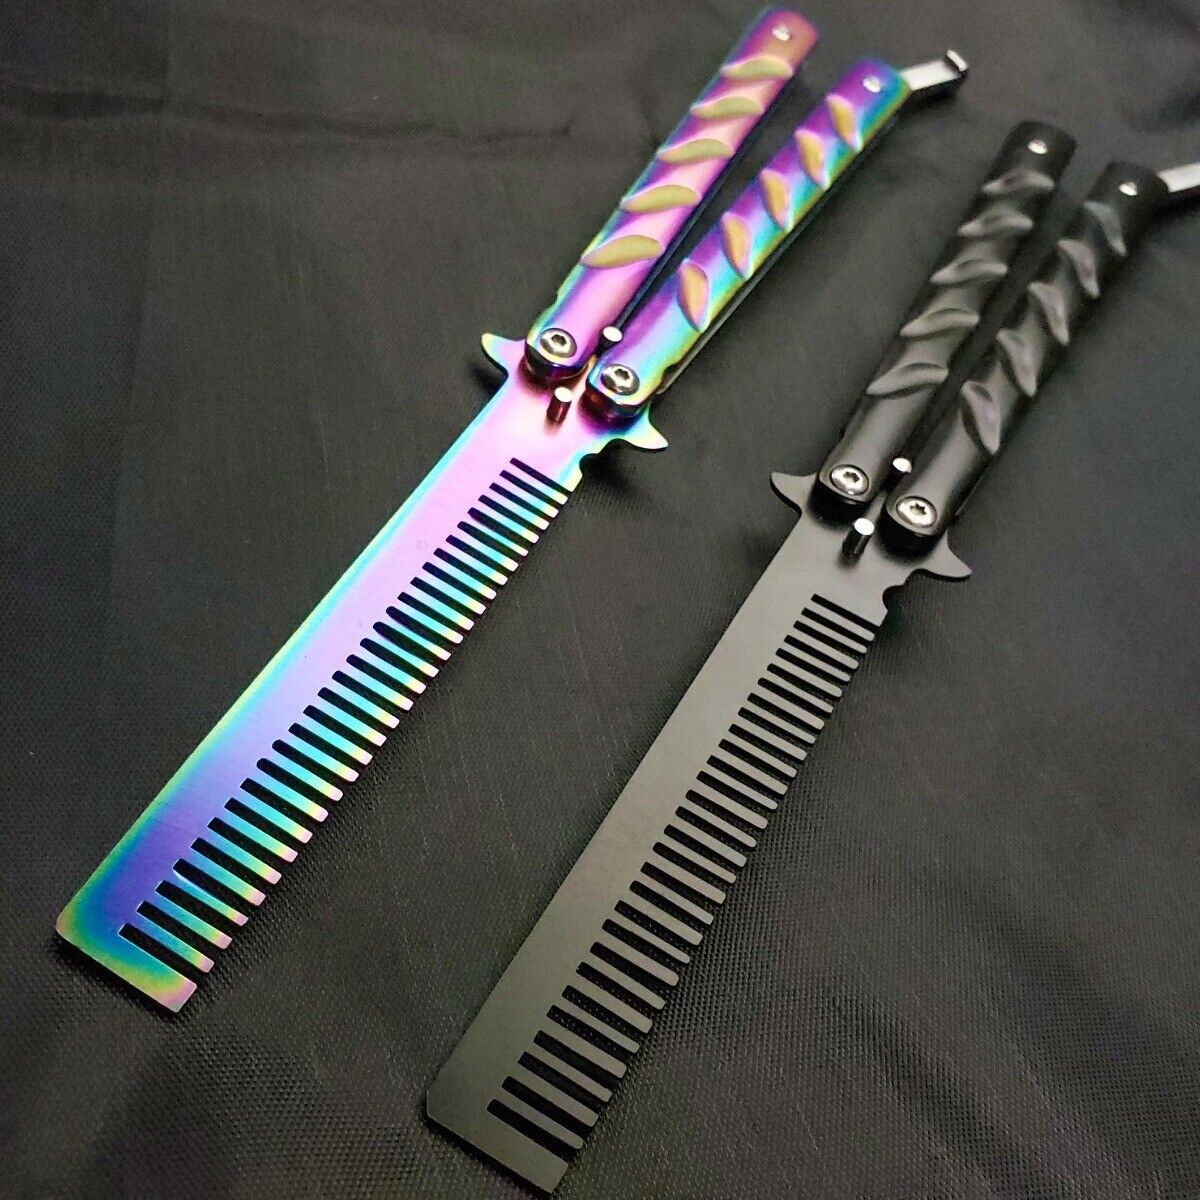 High Quality Practice BALISONG BUTTERFLY Trainer Folding Comb Brush Knife BLADE